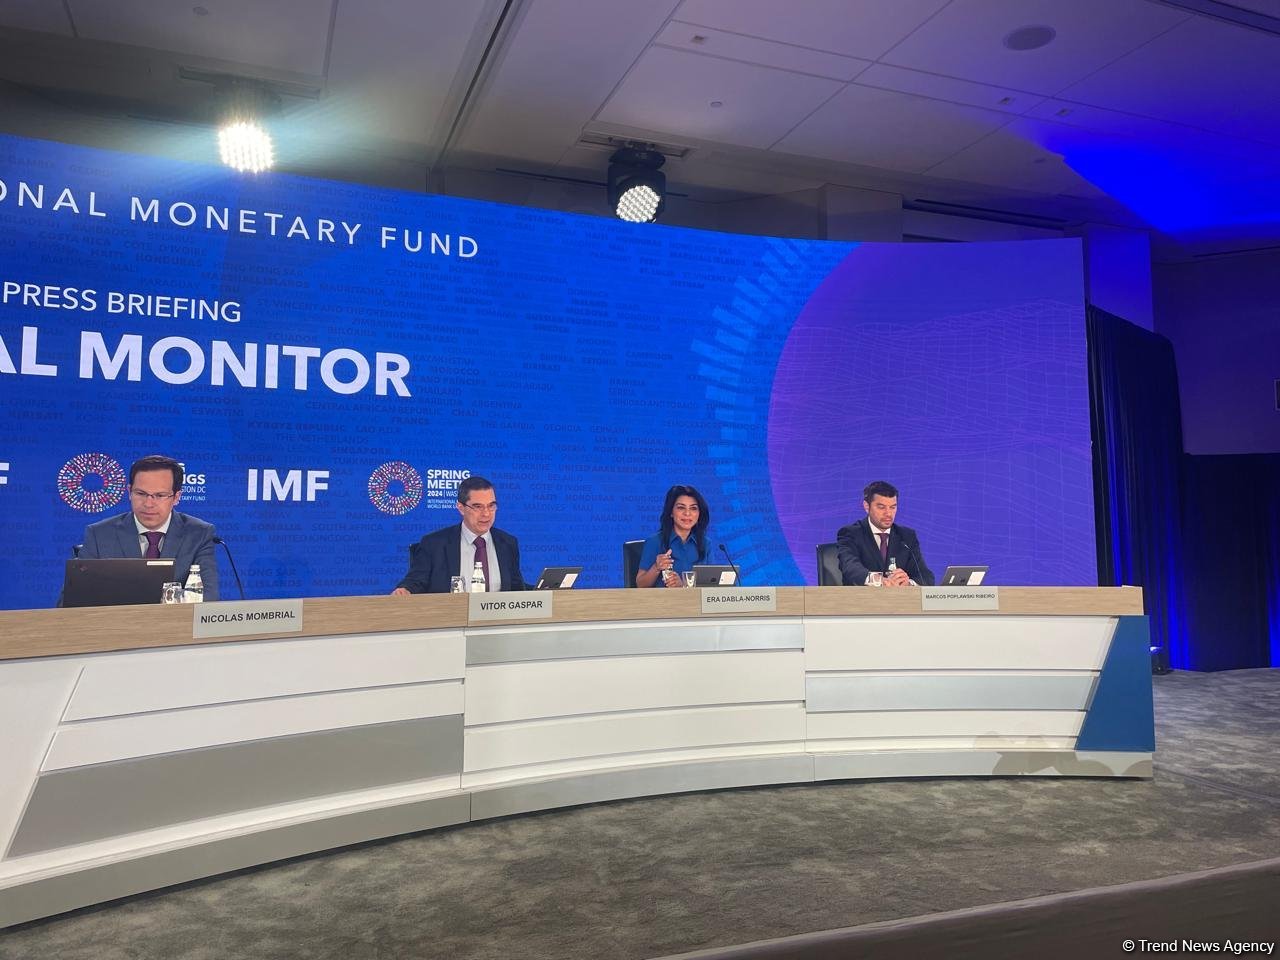 Tackling climate change to require comprehensive combination of policies at national and regional levels - IMF